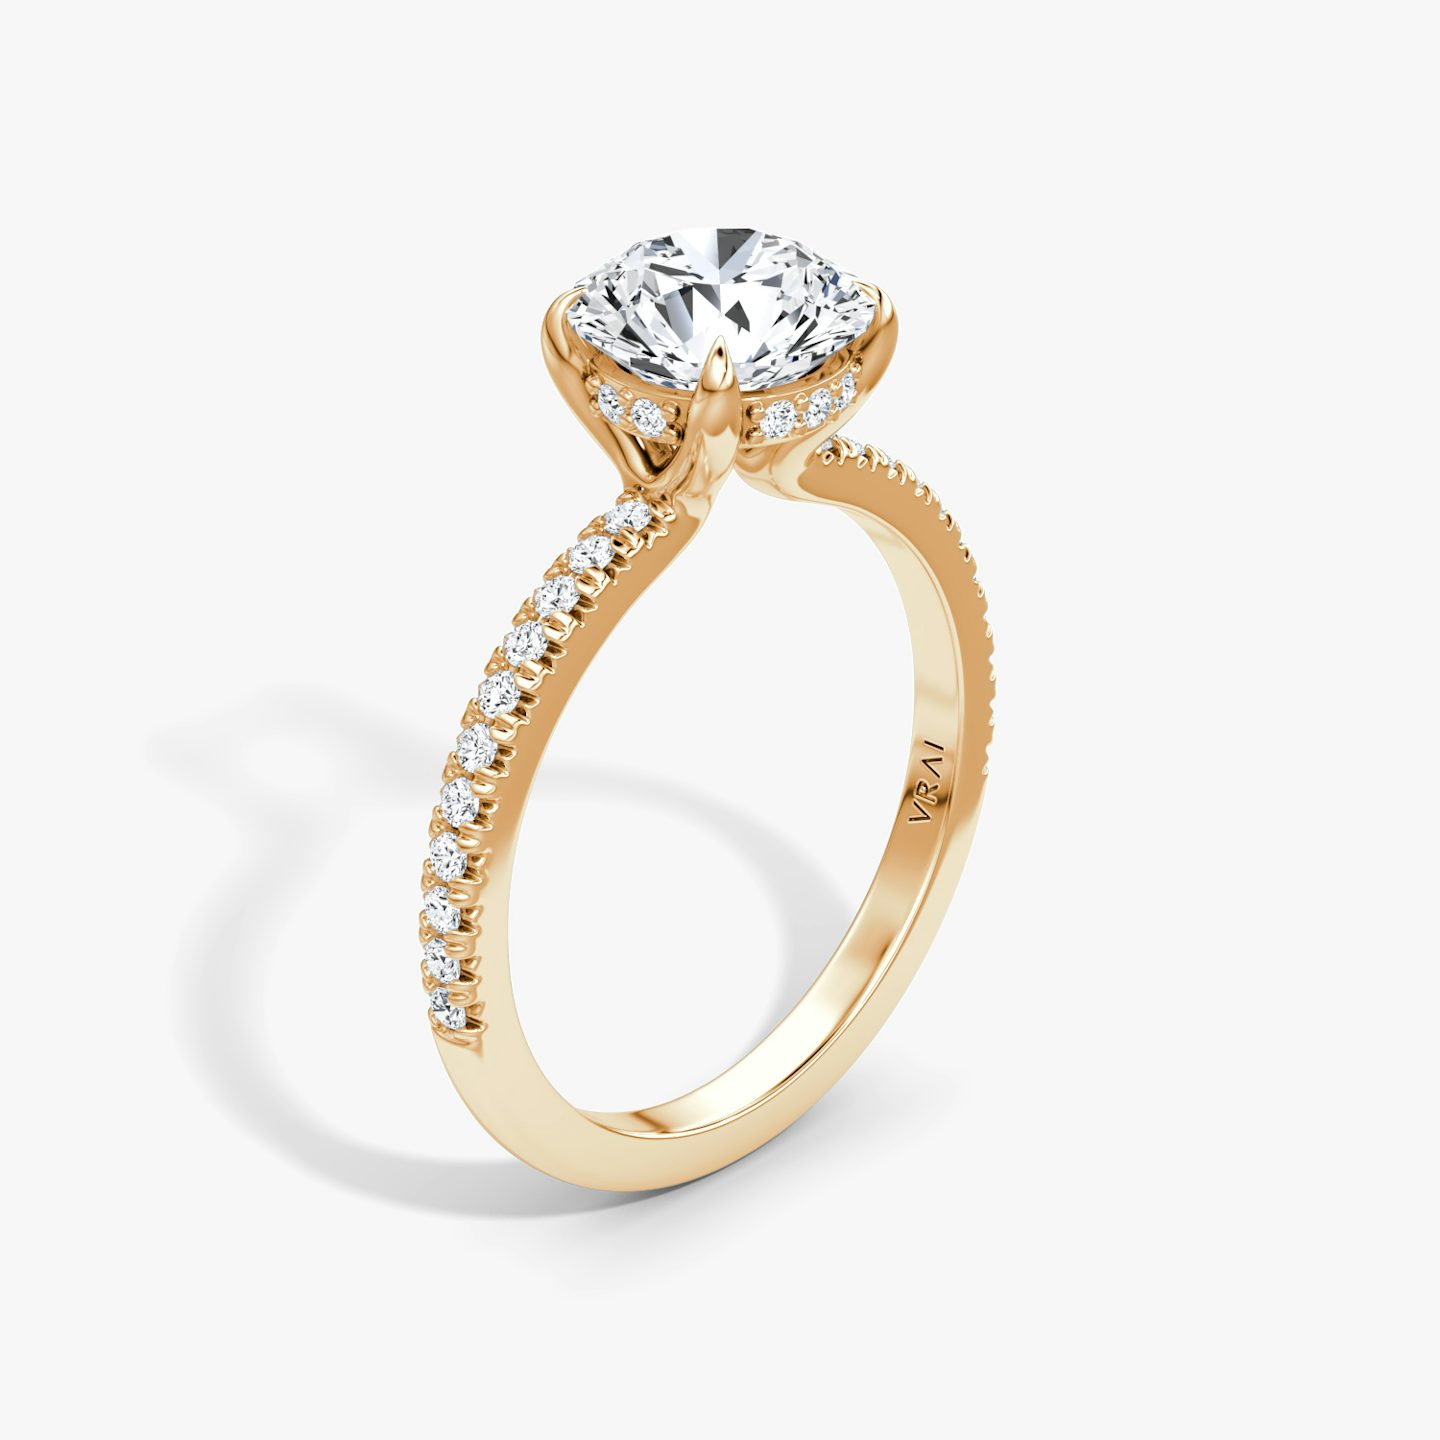 The Floating Solitaire | Round Brilliant | 14k | Rose Gold | bandAccent: Pavé | caratWeight: 2.0ct | diamondOrientation: vertical